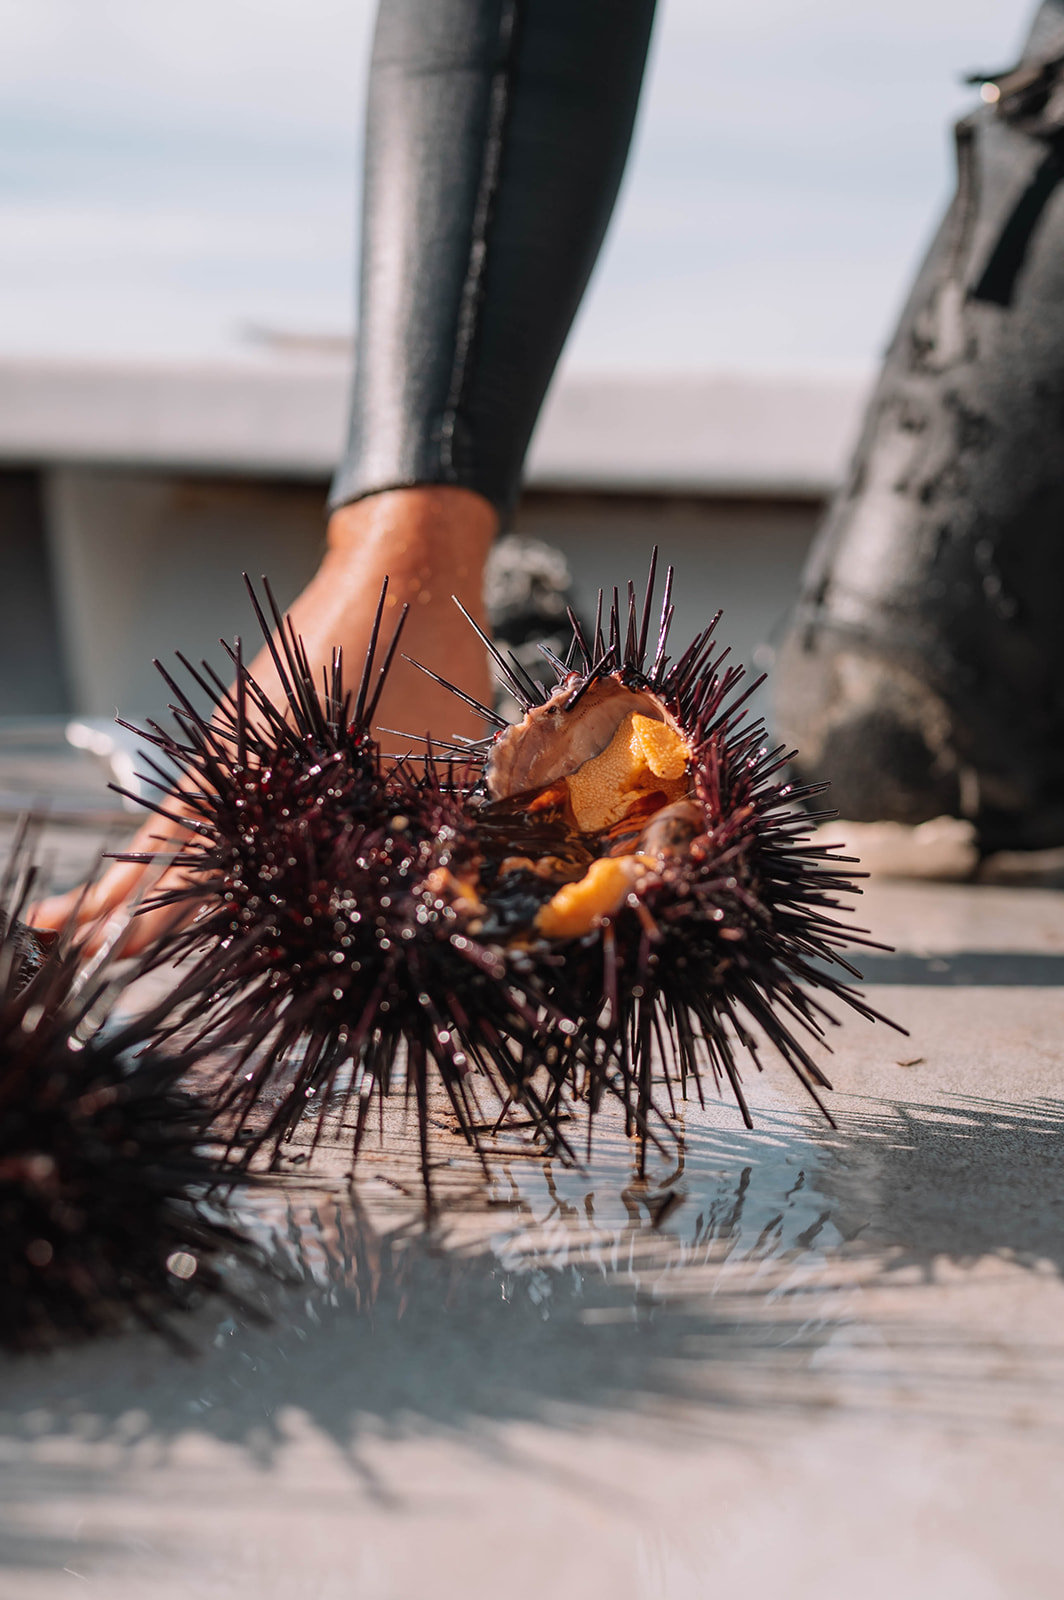 sea urchin on the deck with divers hand for perspective